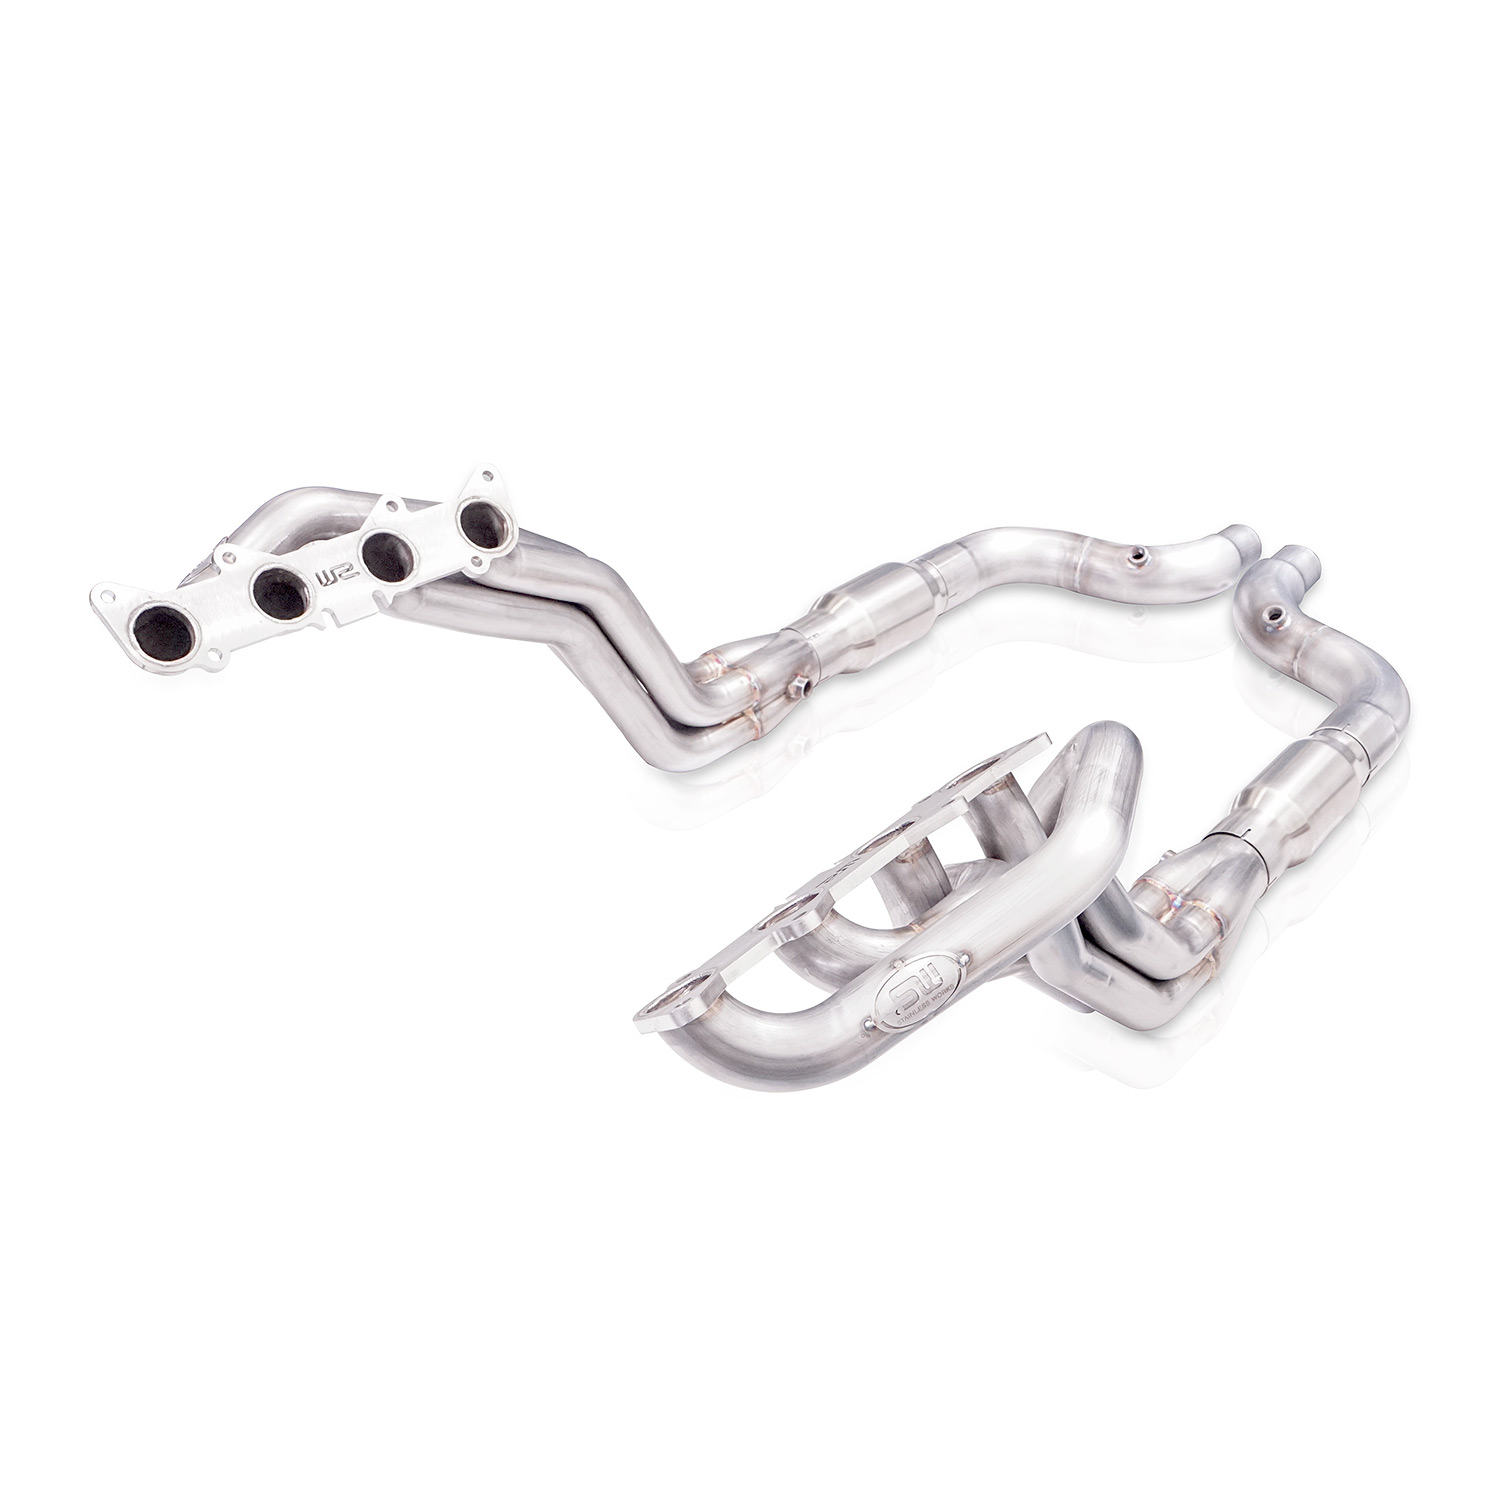 2015-2021 Mustang GT 5.0L SW Headers 2" With Catted Leads Factory Connect